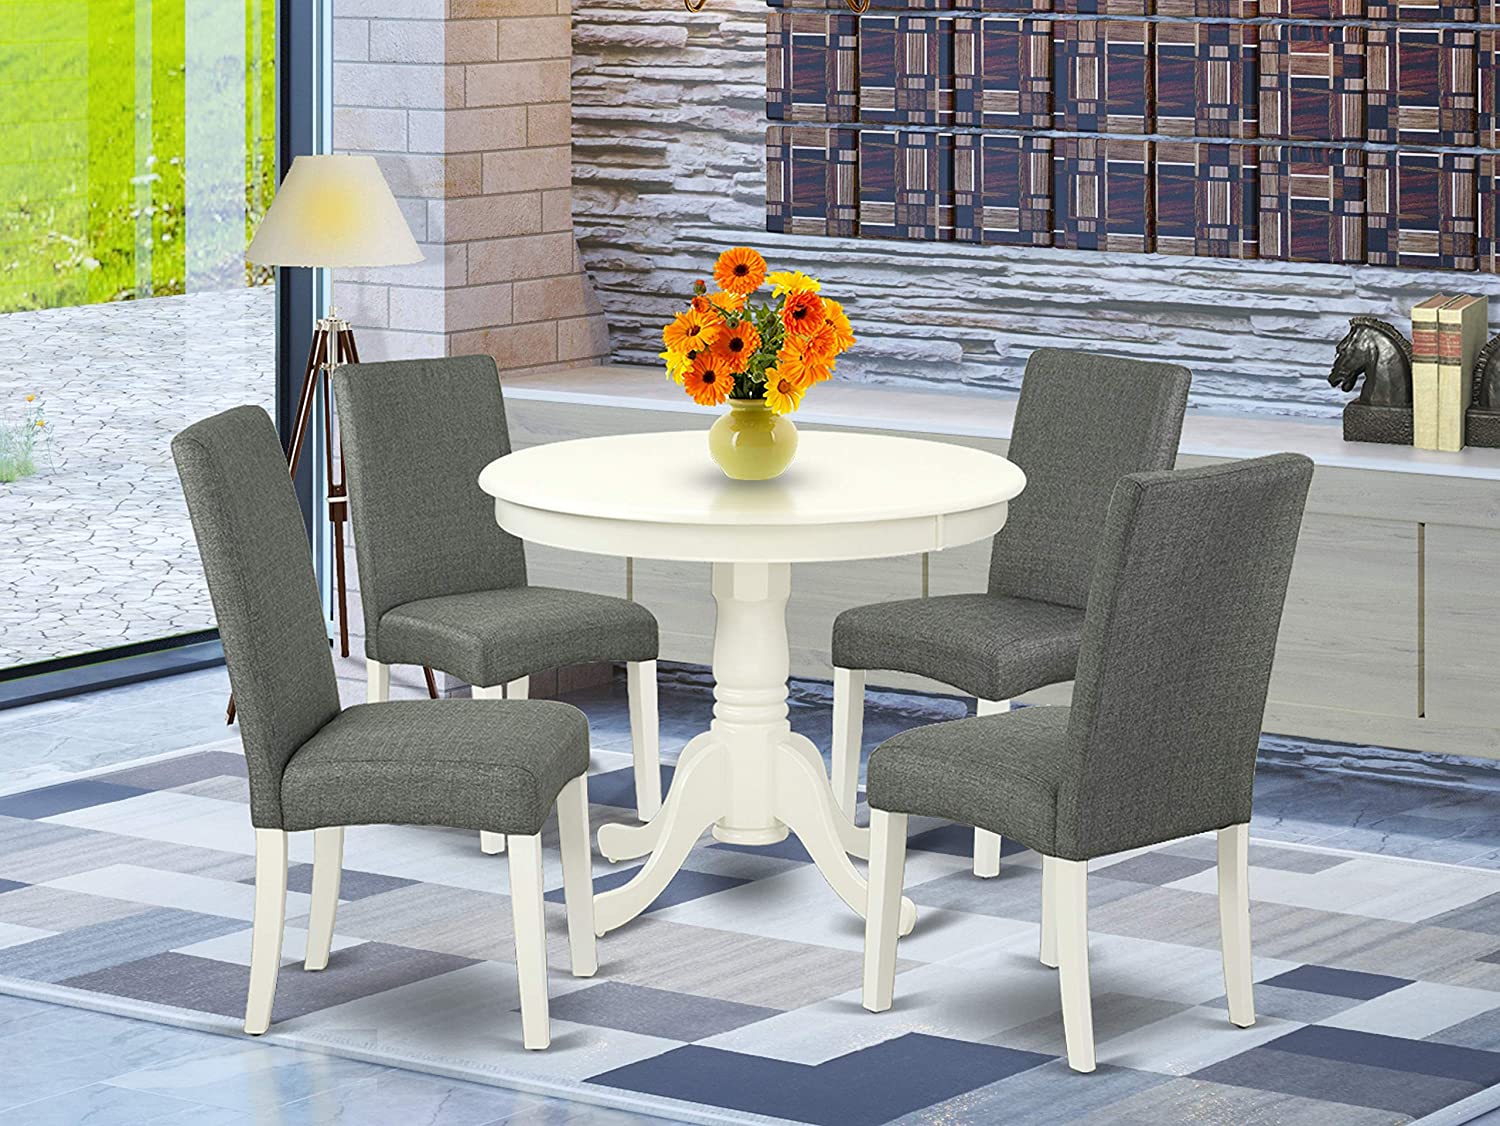 East West Furniture ANDR5-LWH-07 Wood Dinette Set 5 Pc - Grey Linen Fabric Parsons Chairs - Linen White Finish Solid Wood Pedestal Mid century Dining Table and Frame